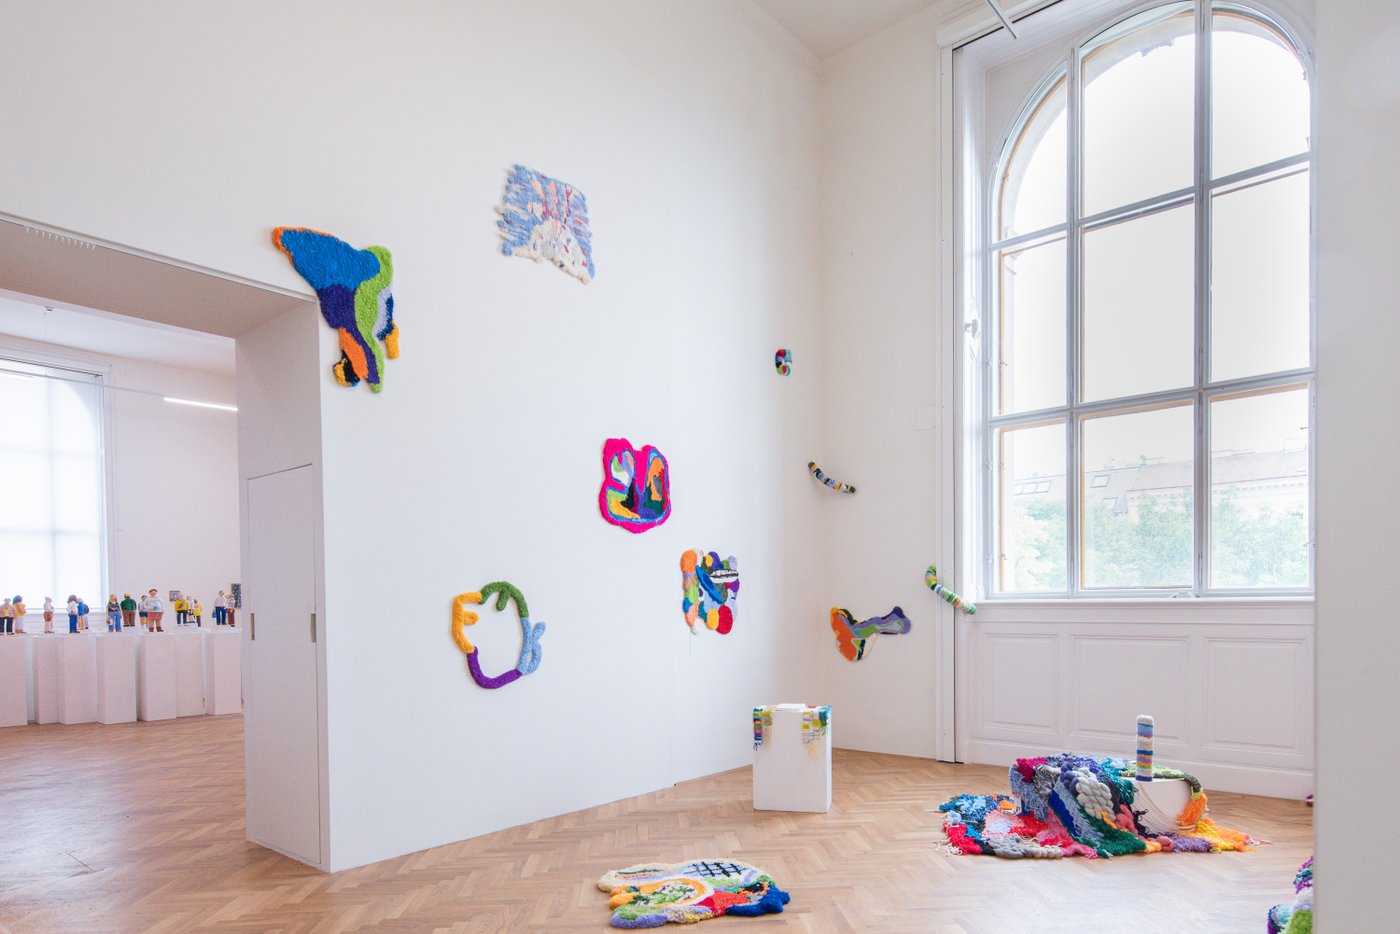 several colorful carpet-like fabric objects fixed on the floor and on the wall, on the right a large arched window, on the left the room opens up